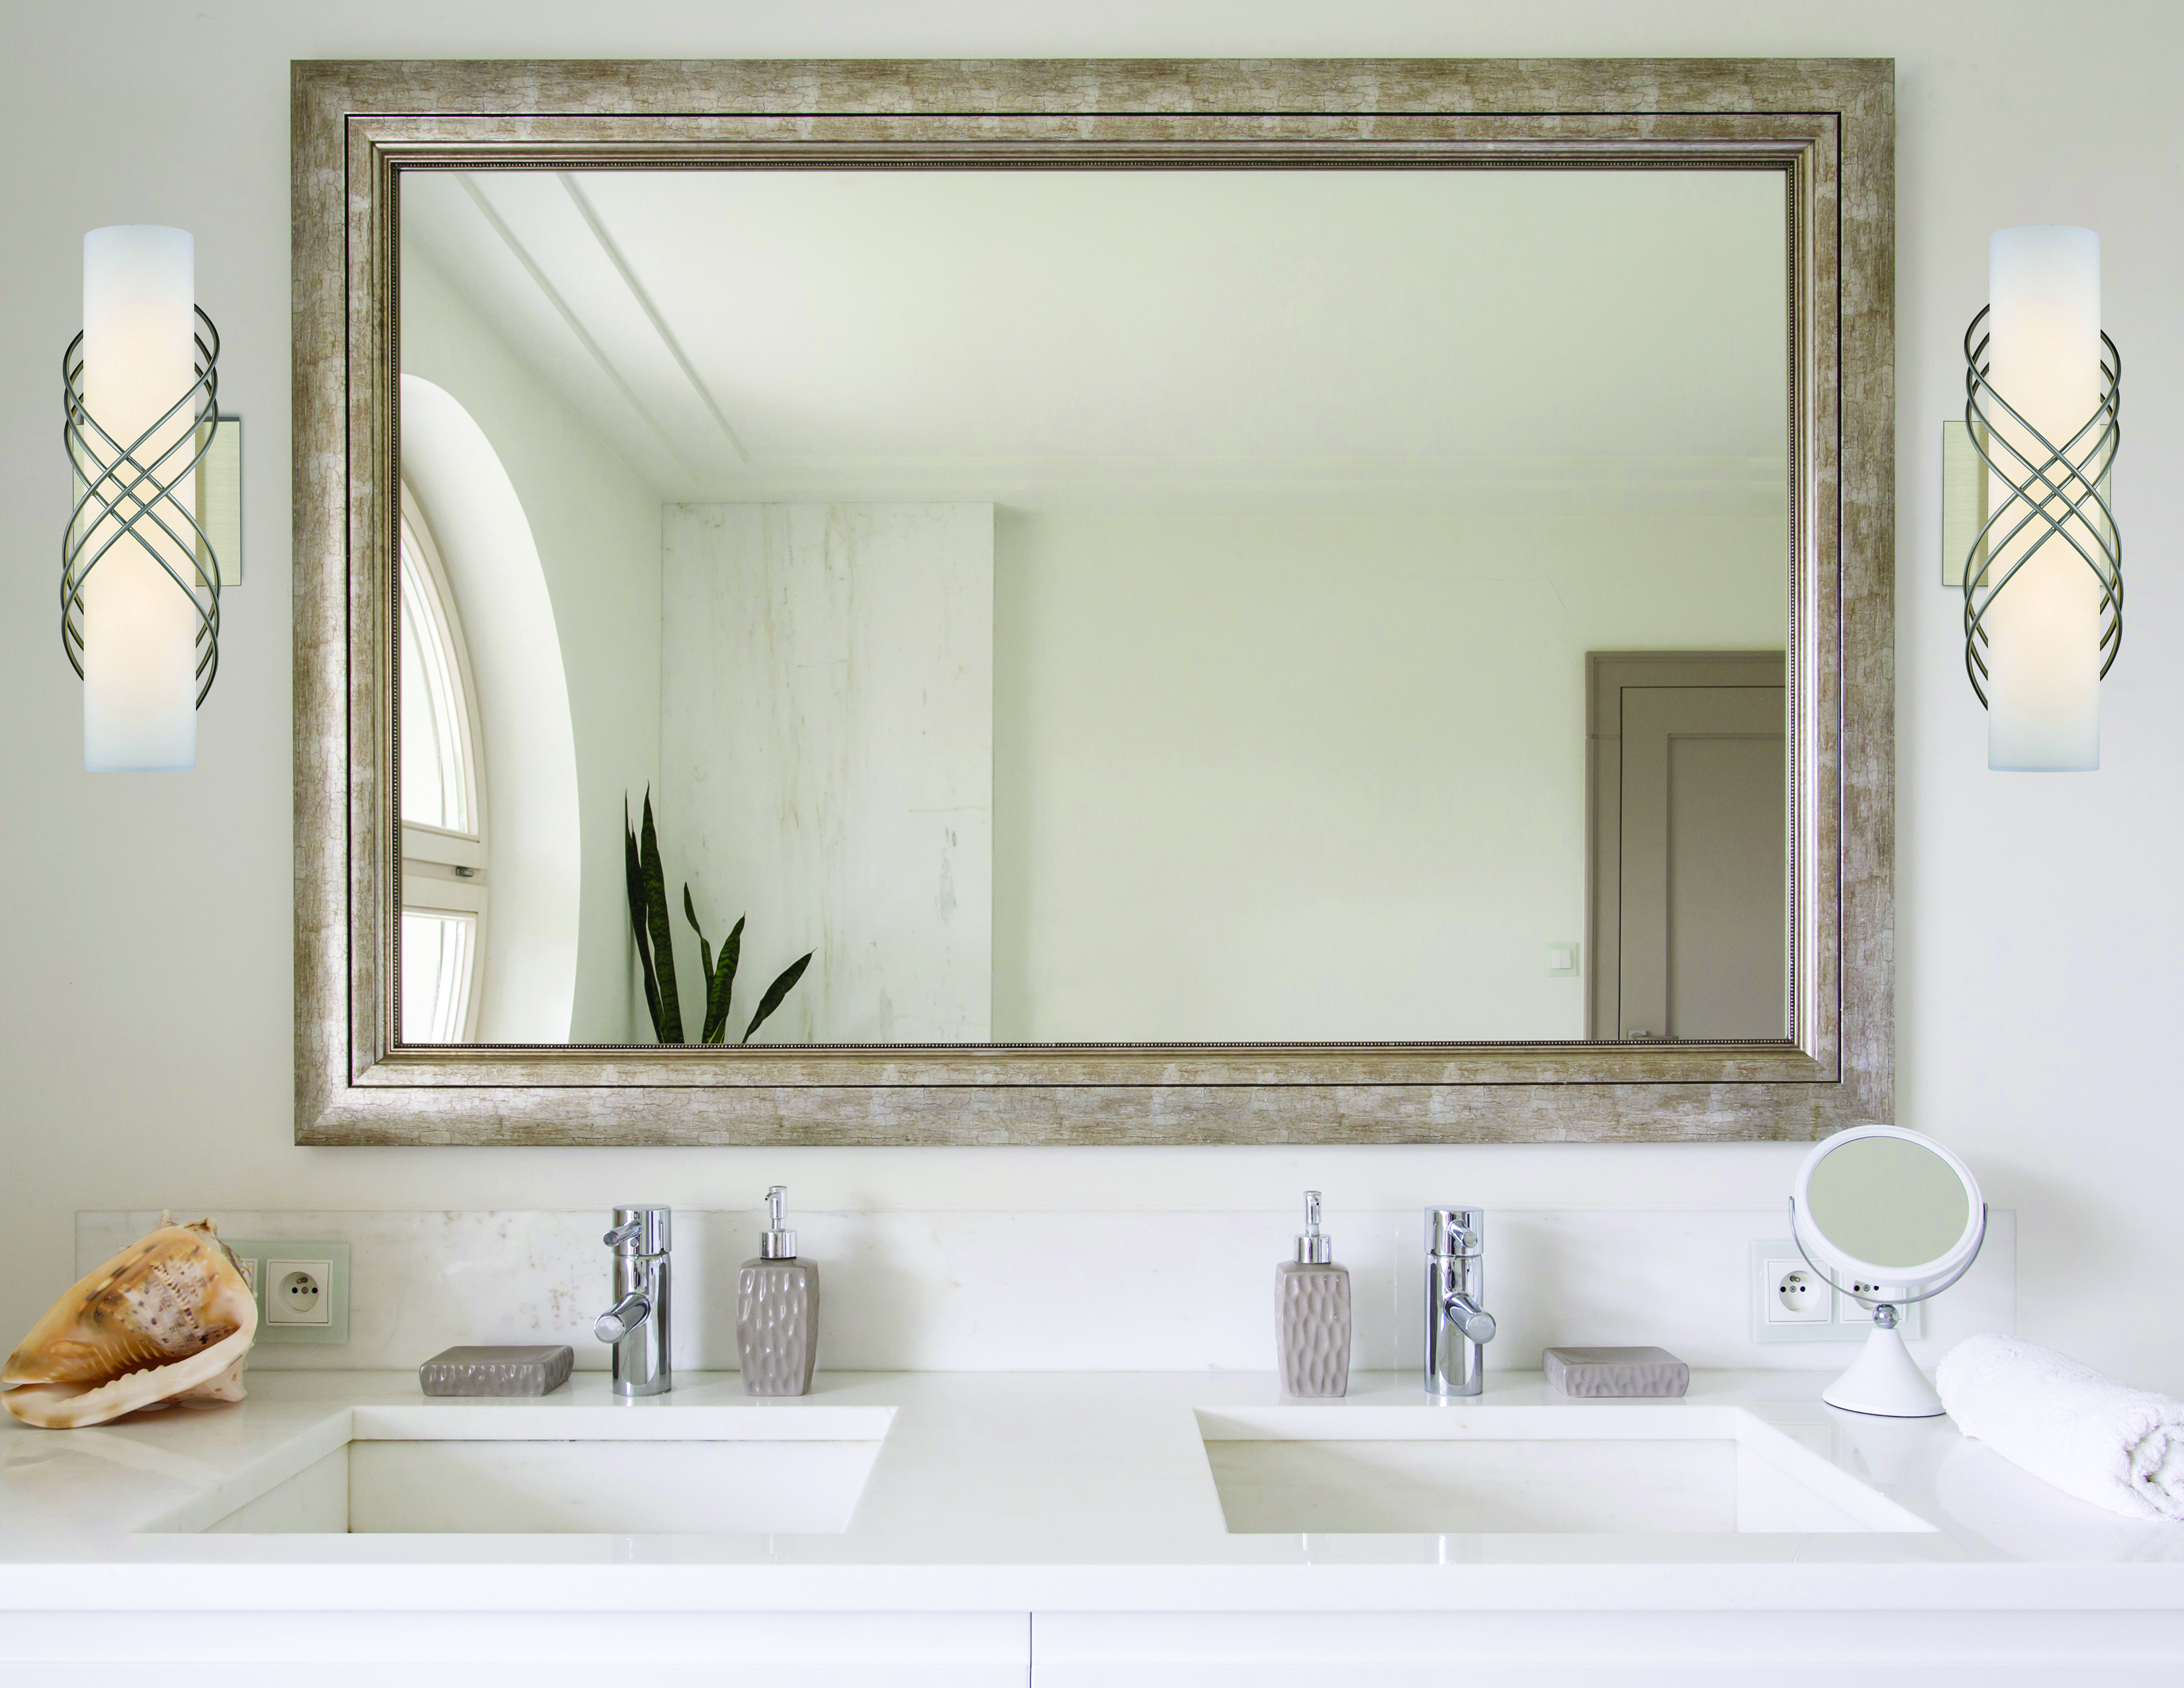 How to Mount a Light On Top of a Mirror Bathroom Vanity